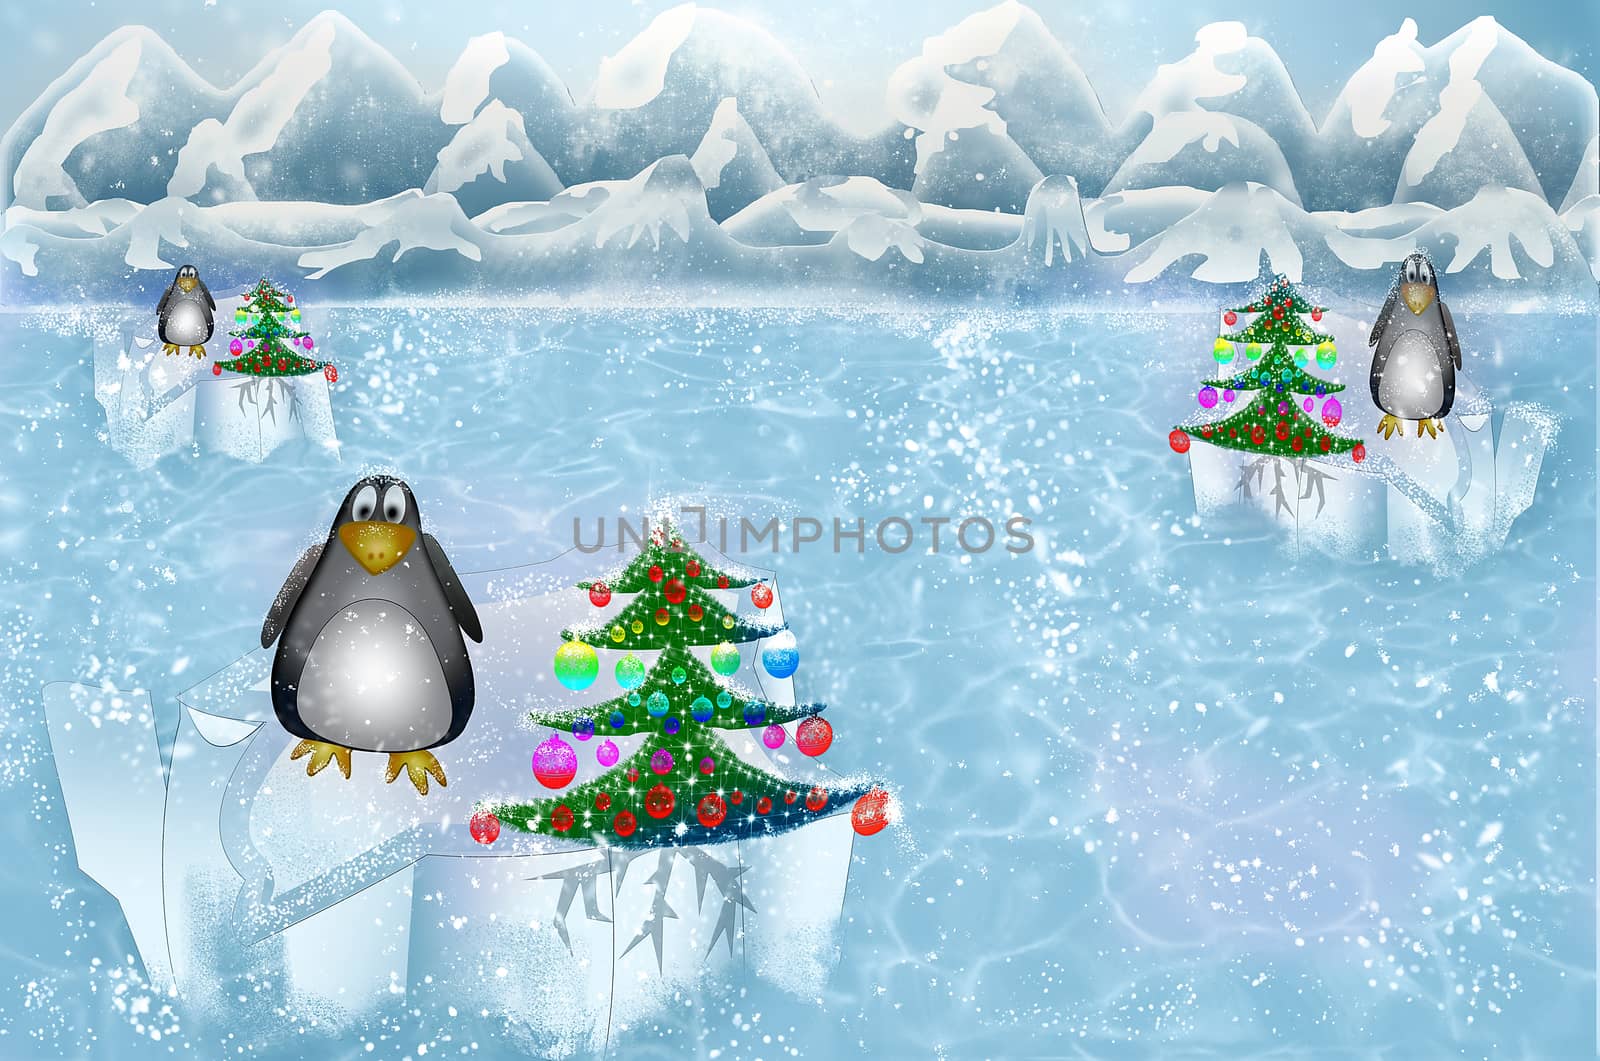 Landscape of the Arctic, Antarctica or Greenland. Greeting card. Little penguins celebrate New Year near decorated Christmas tree. Illustration